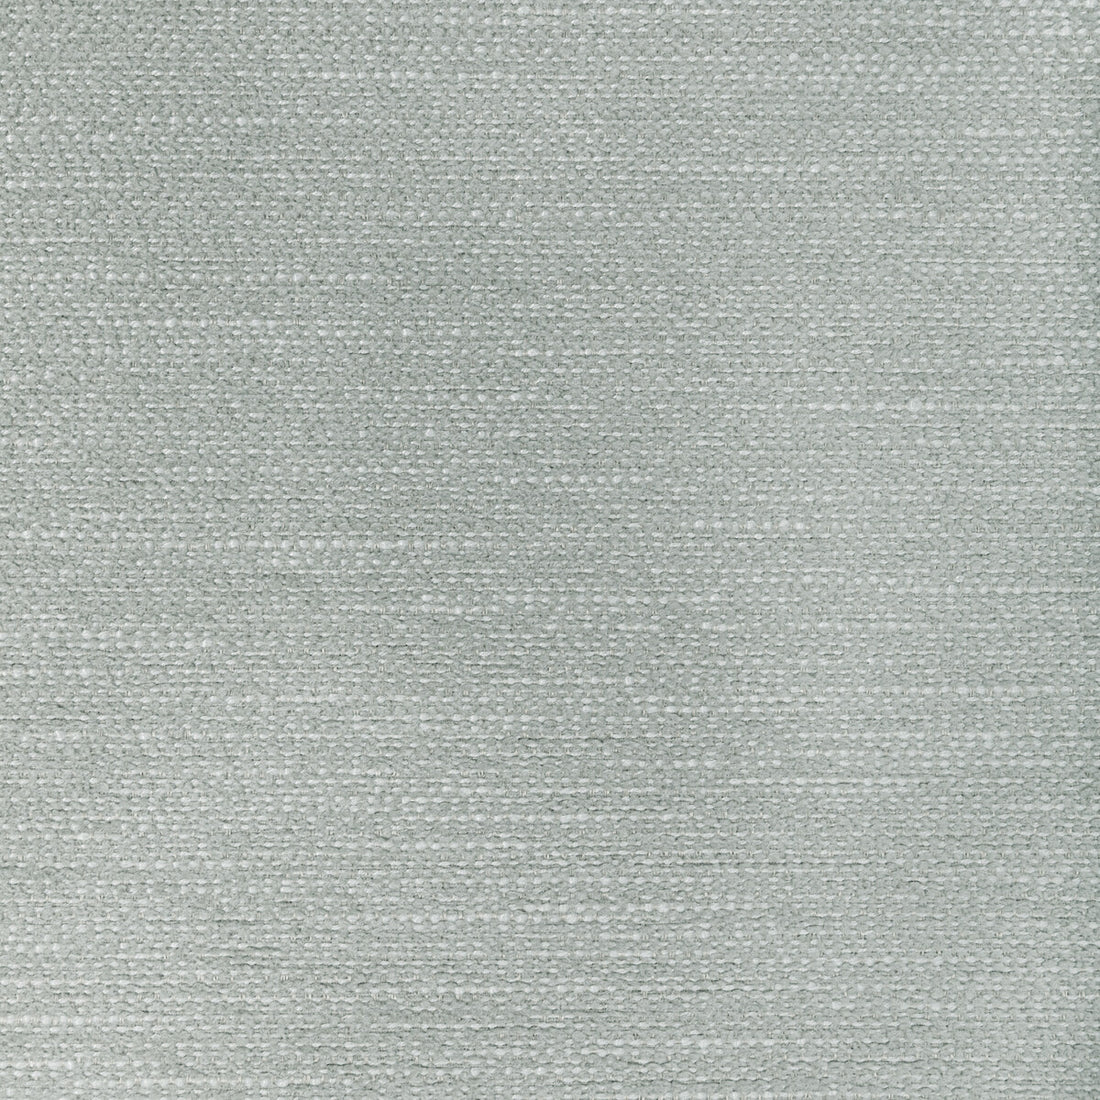 Recoup fabric in cloud color - pattern 36569.11.0 - by Kravet Contract in the Seaqual collection